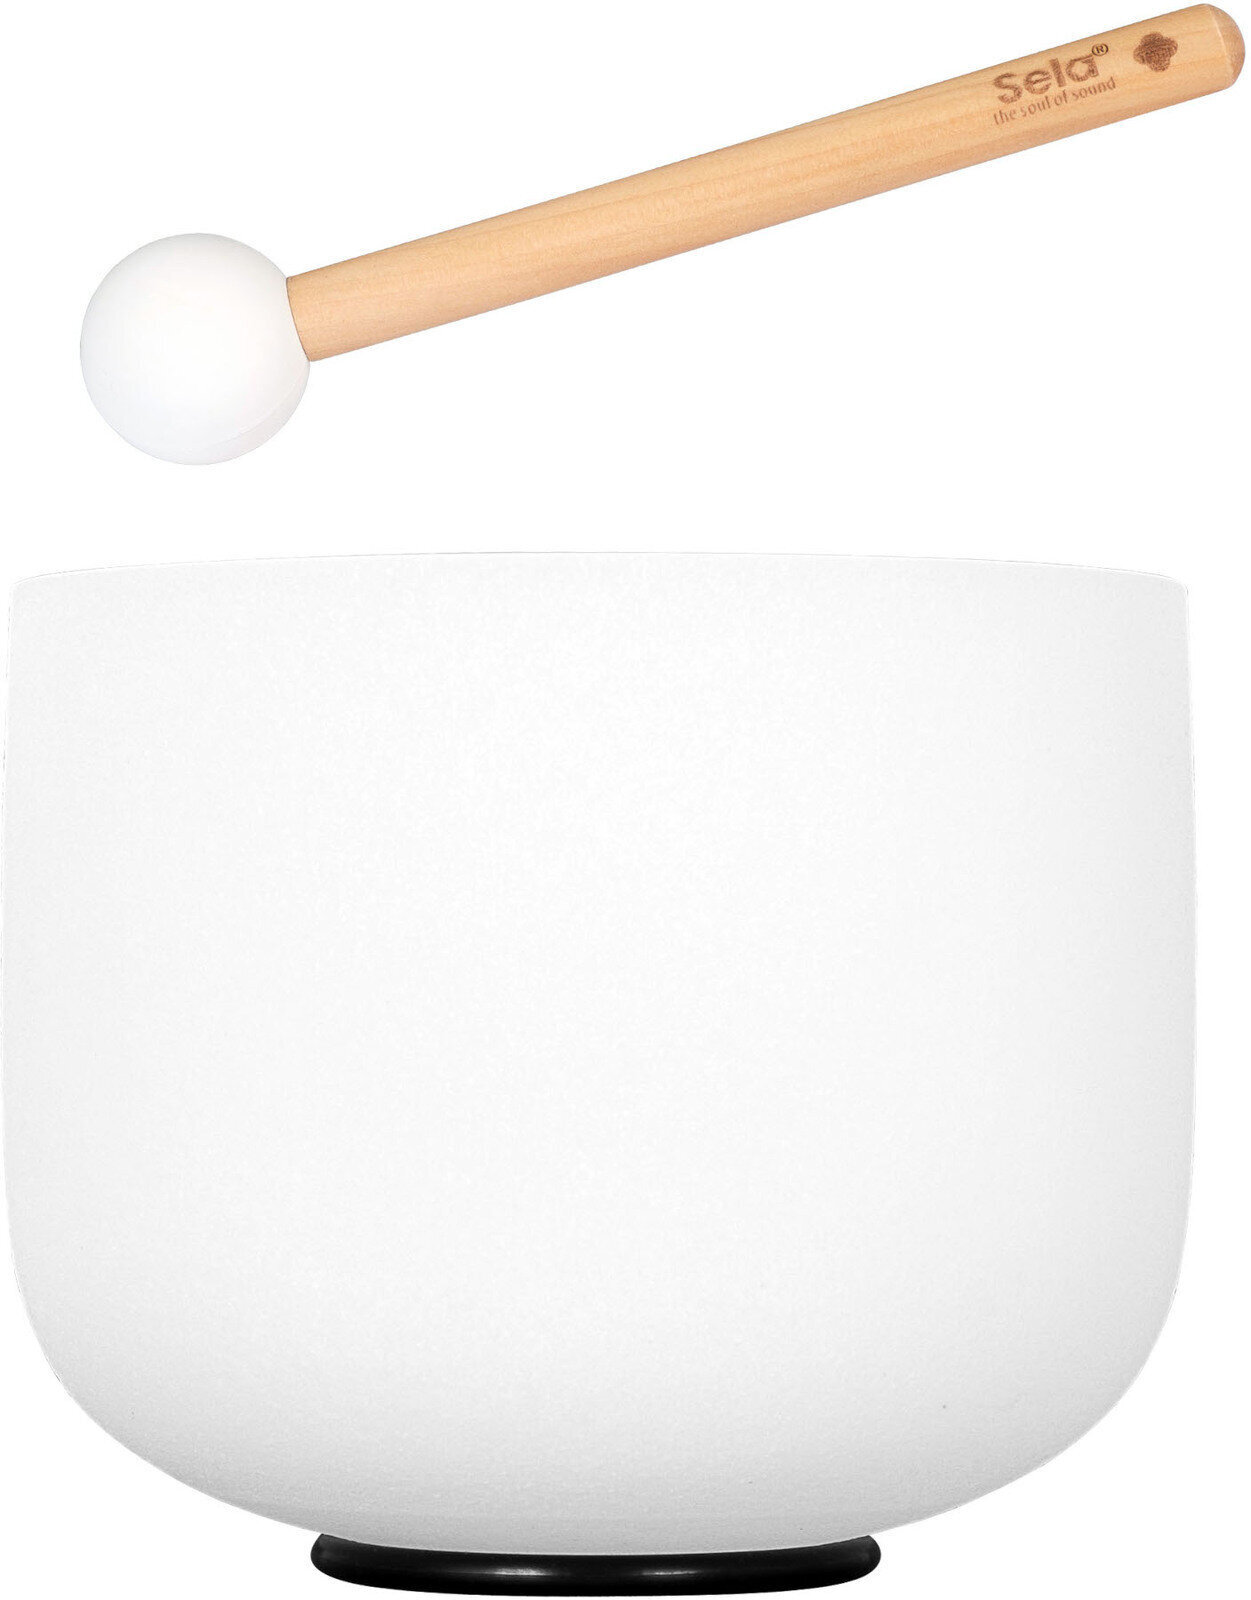 Percussions musicothérapeutiques Sela 10" Crystal Singing Bowl Frosted 432 Hz F incl. 1 Wood Mallet